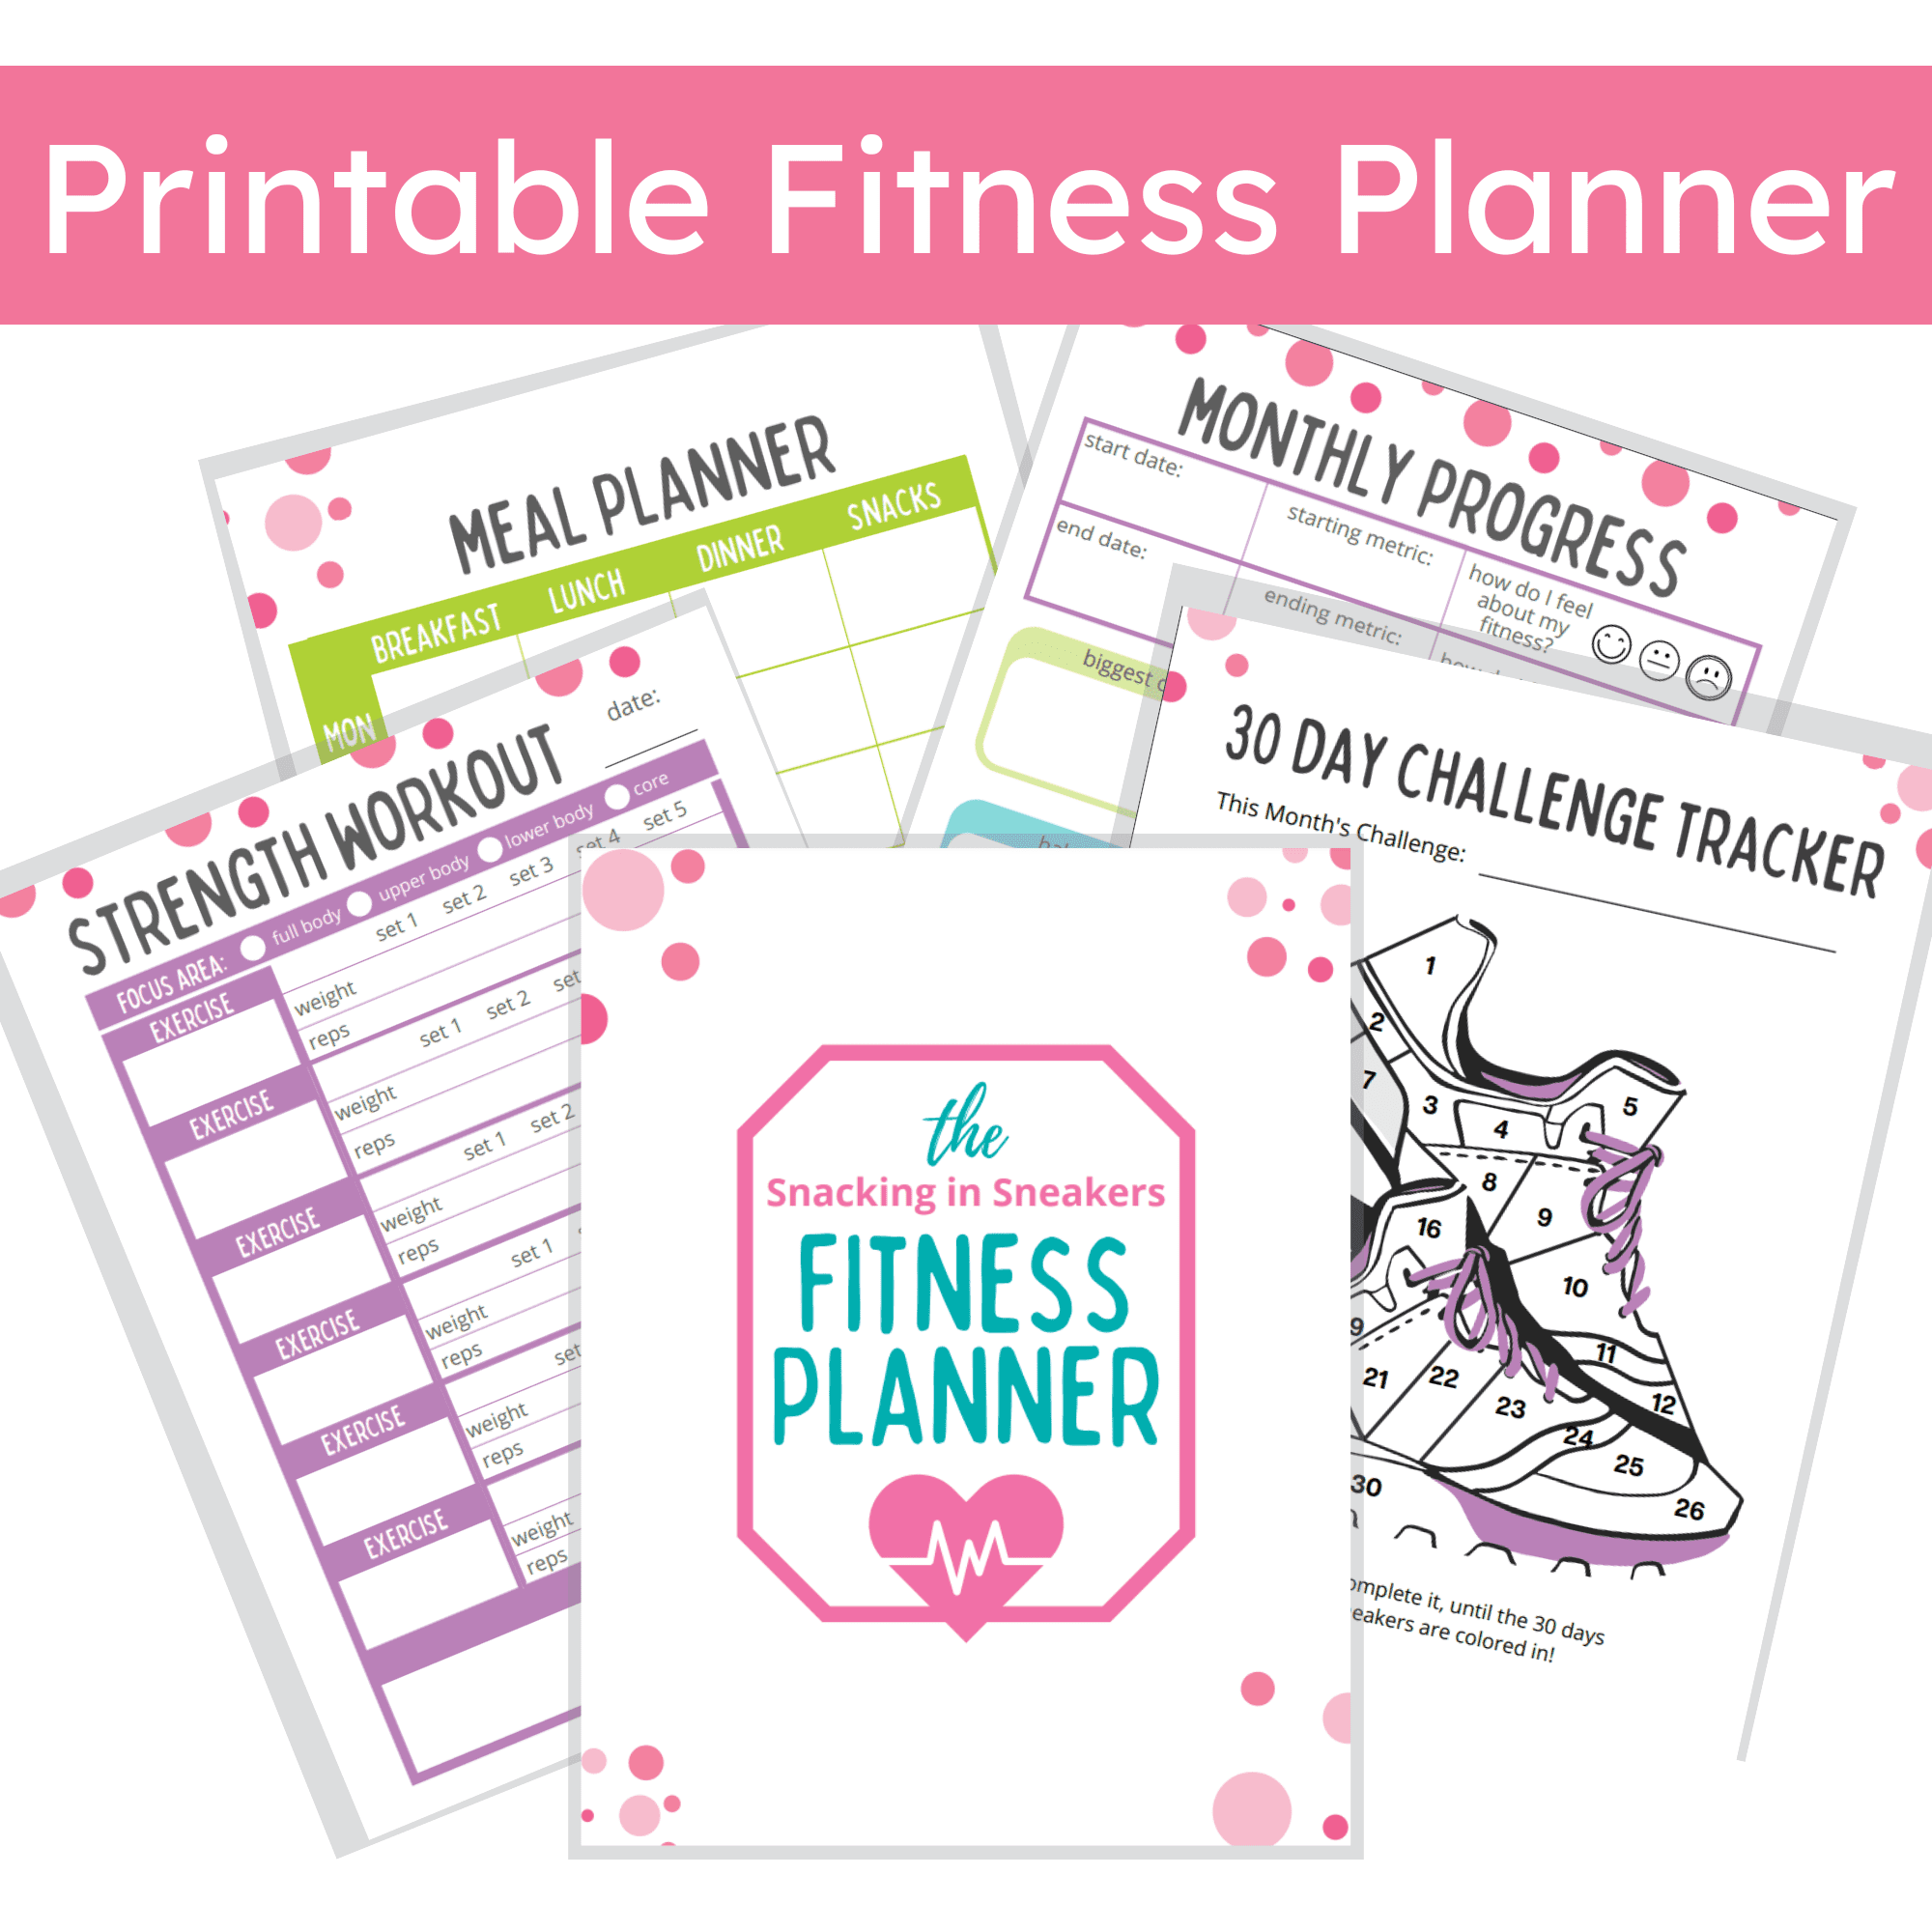 Printable Fitness Planner - Snacking in Sneakers